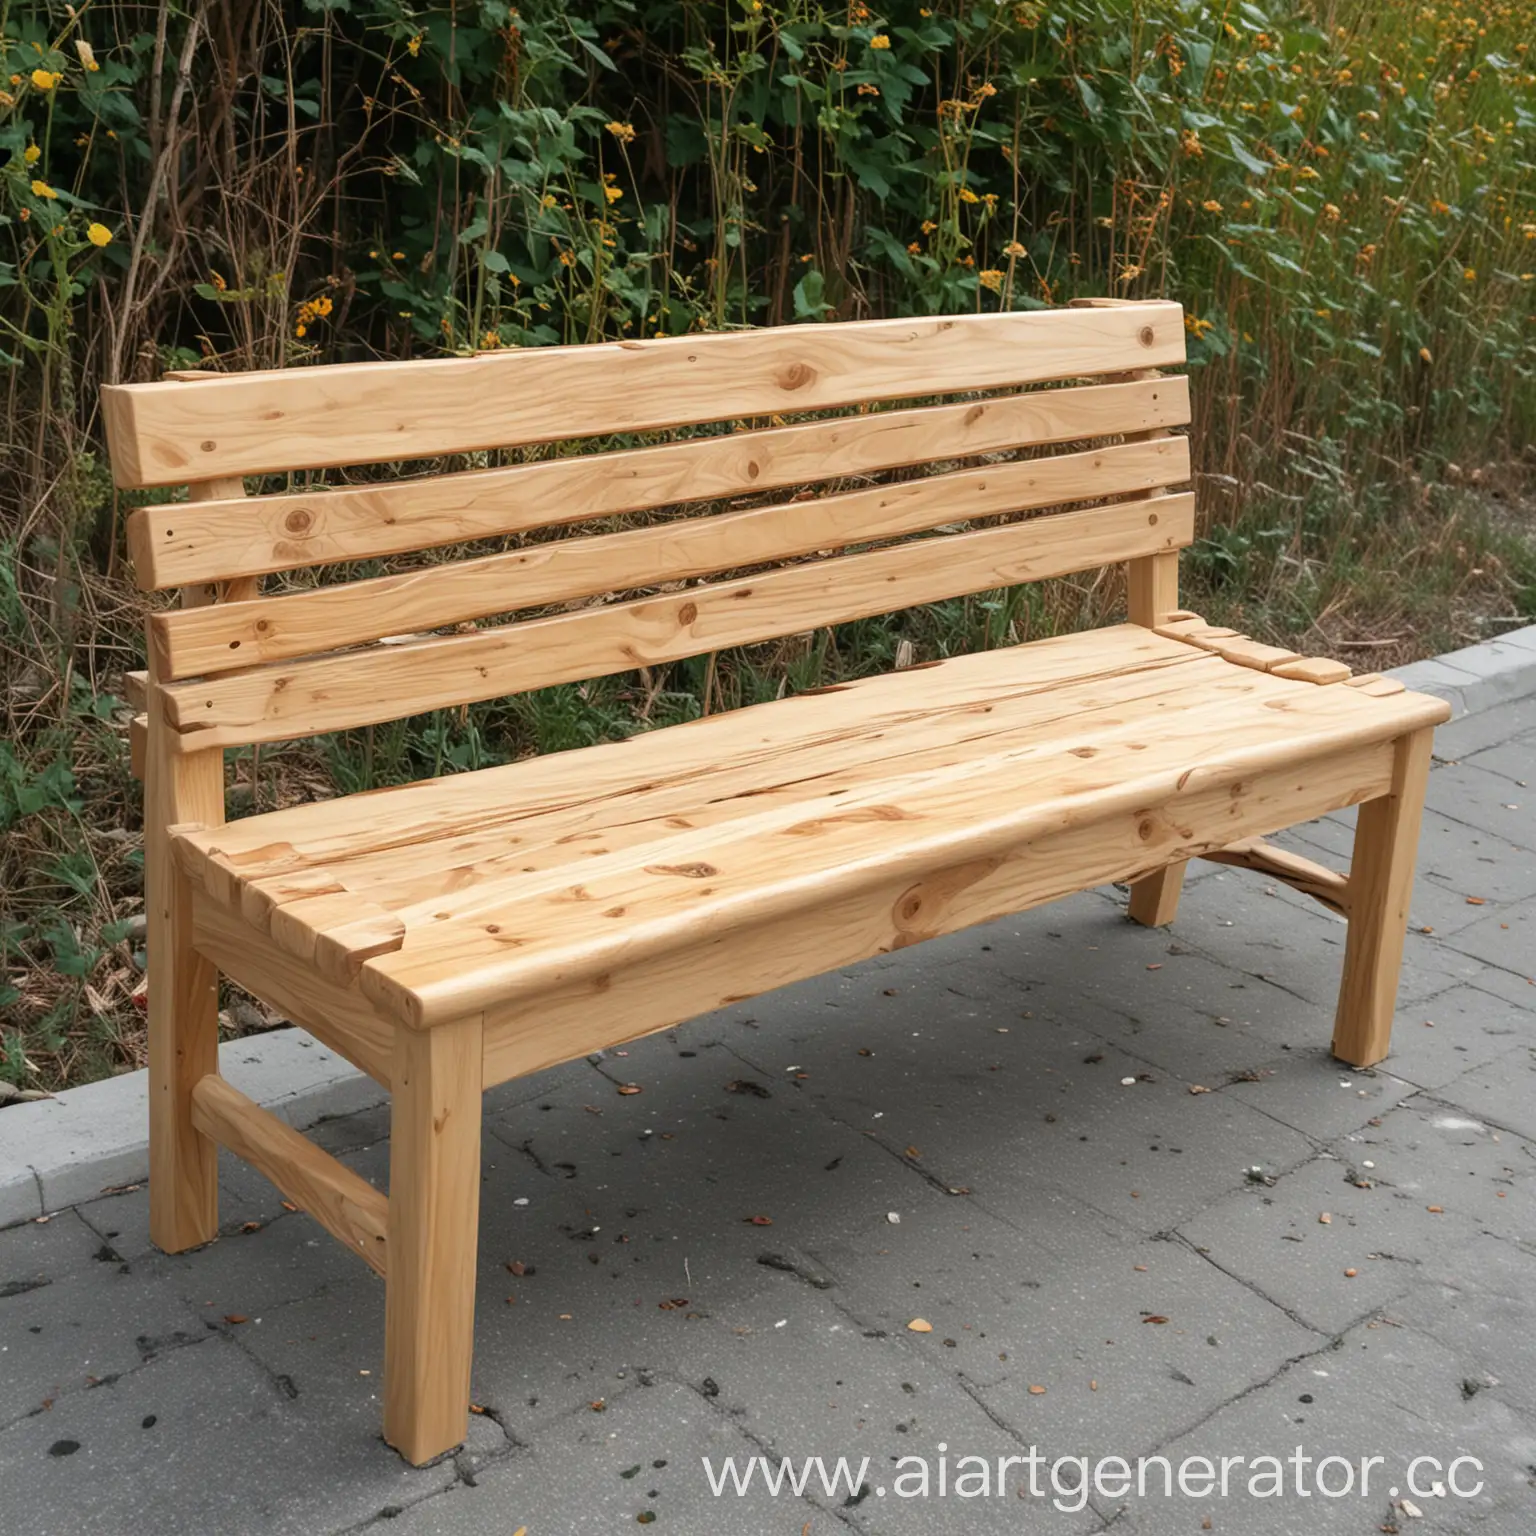 Rustic-Wooden-Bench-Crafted-from-Brusiv-DPKColored-Linden-Wood